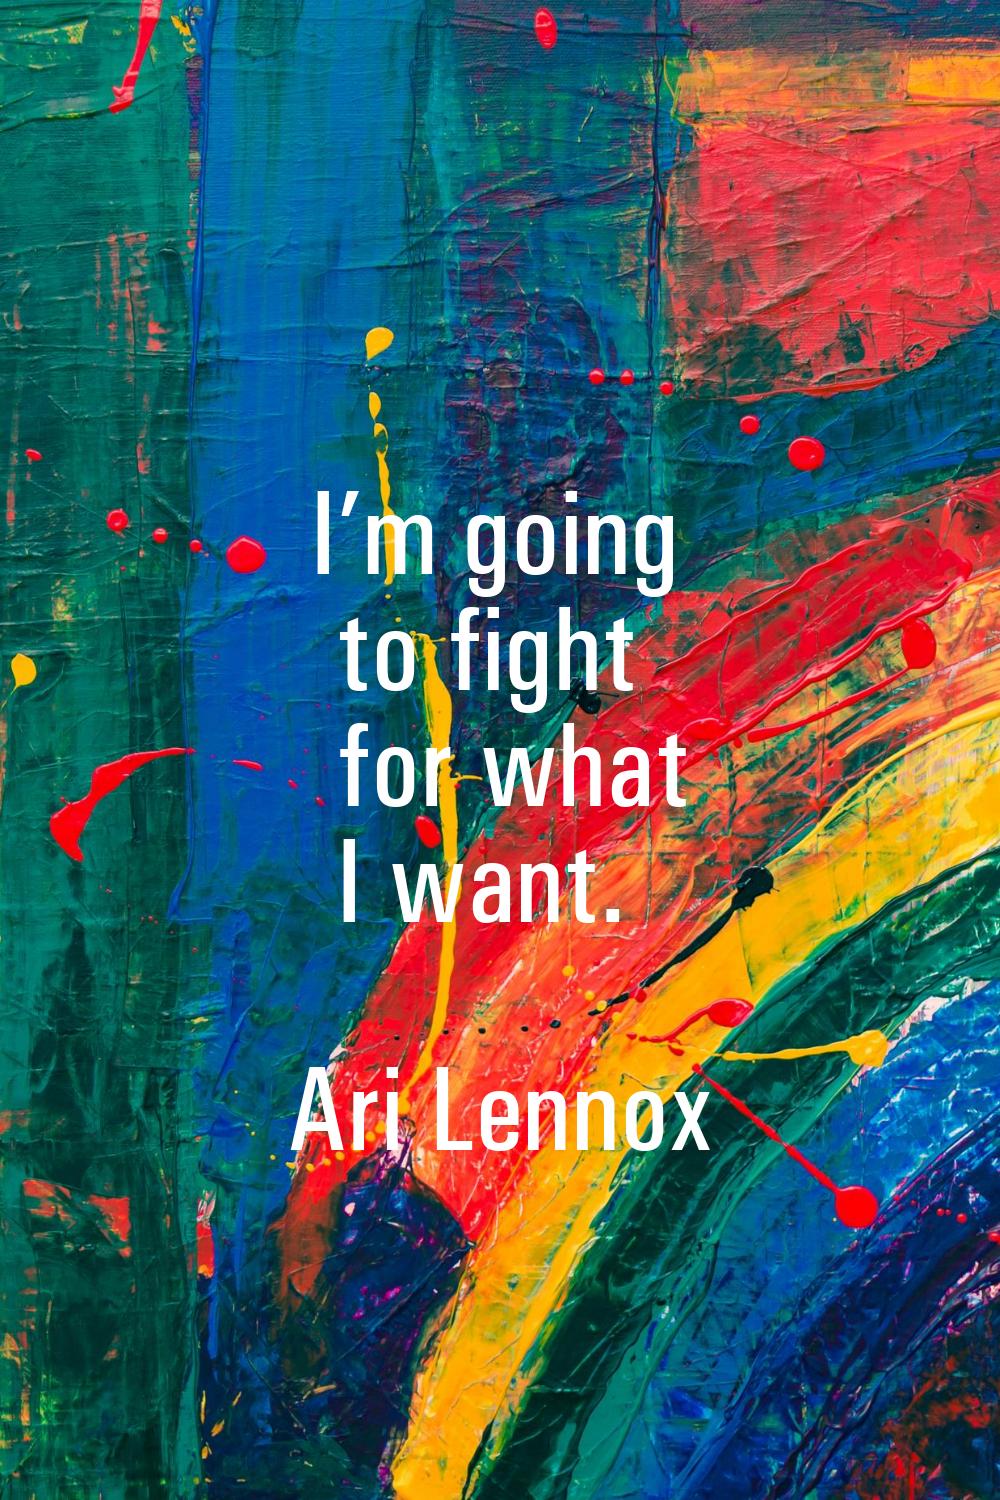 I’m going to fight for what I want.